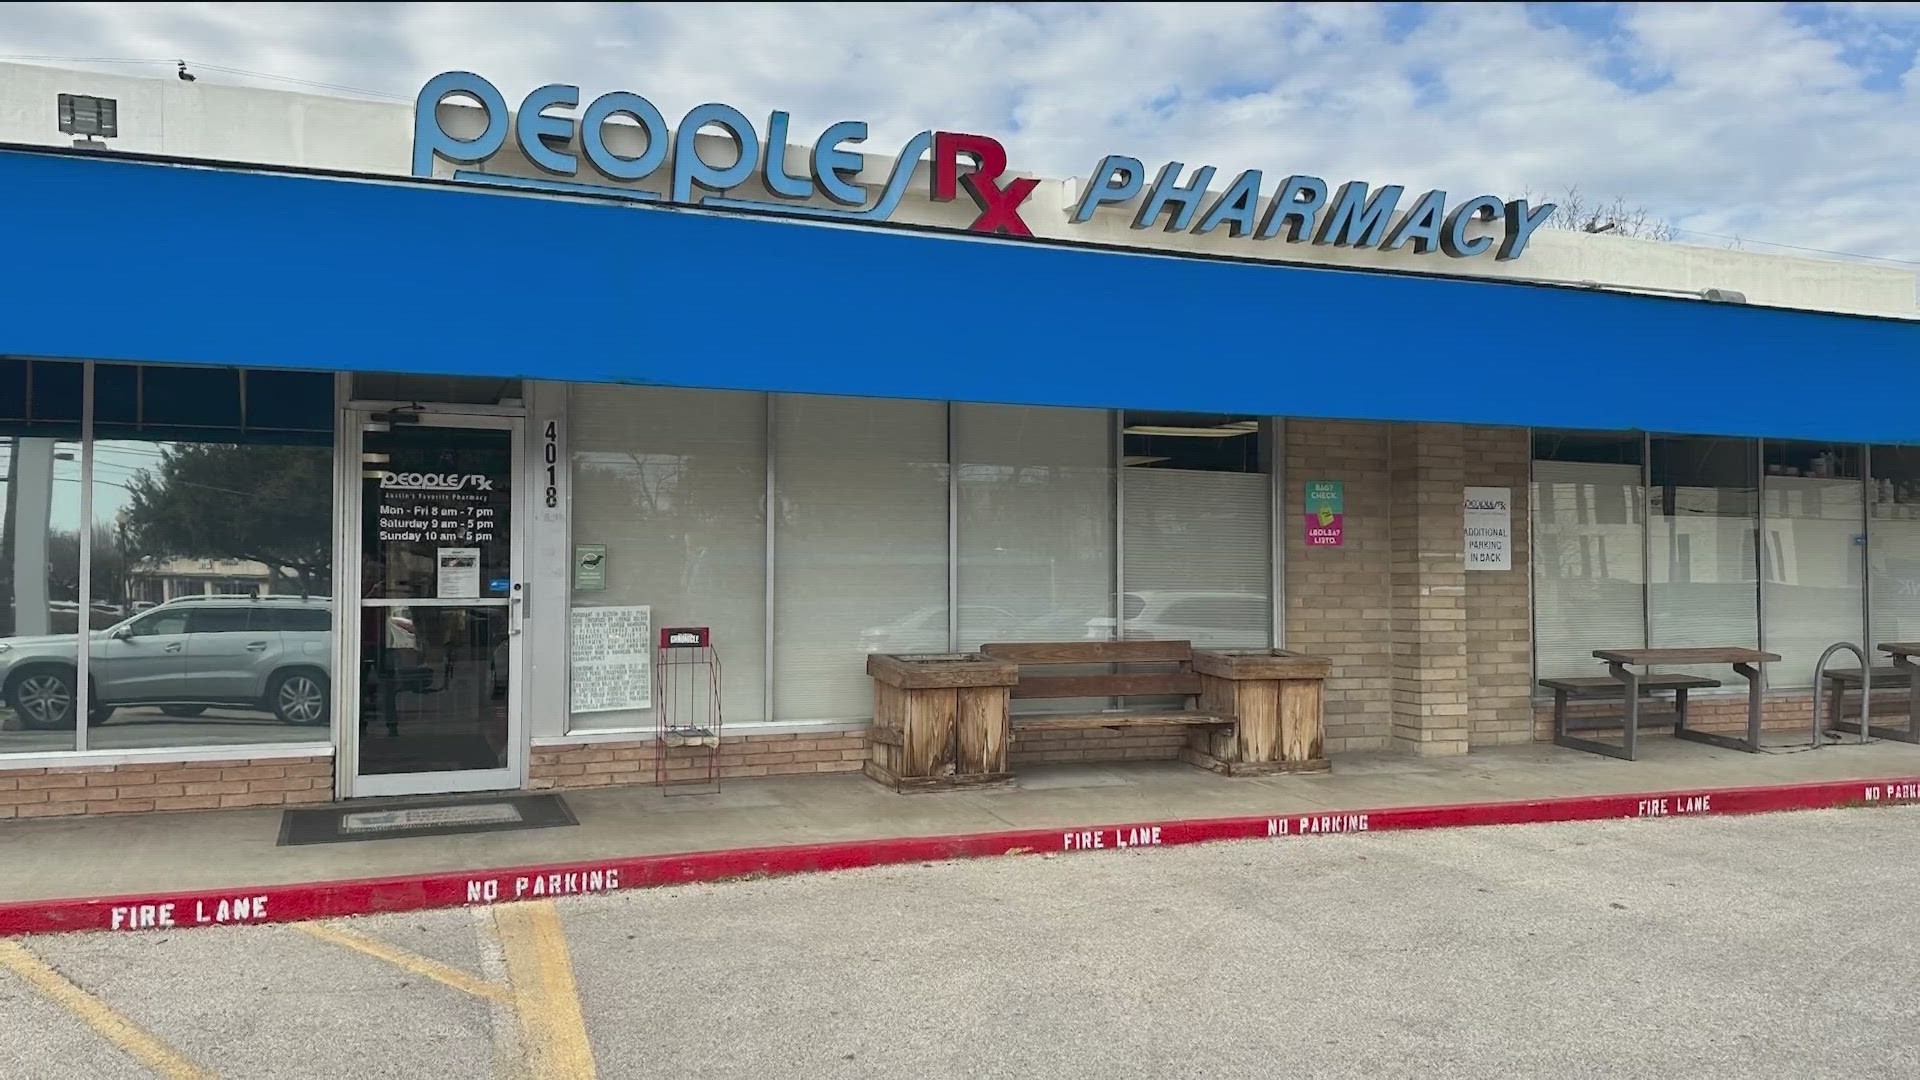 Austin-based Peoples Pharmacy has agreed to pay $200,000 in fines to resolve allegations it sold cough medicine requiring a prescription without doctor approval.